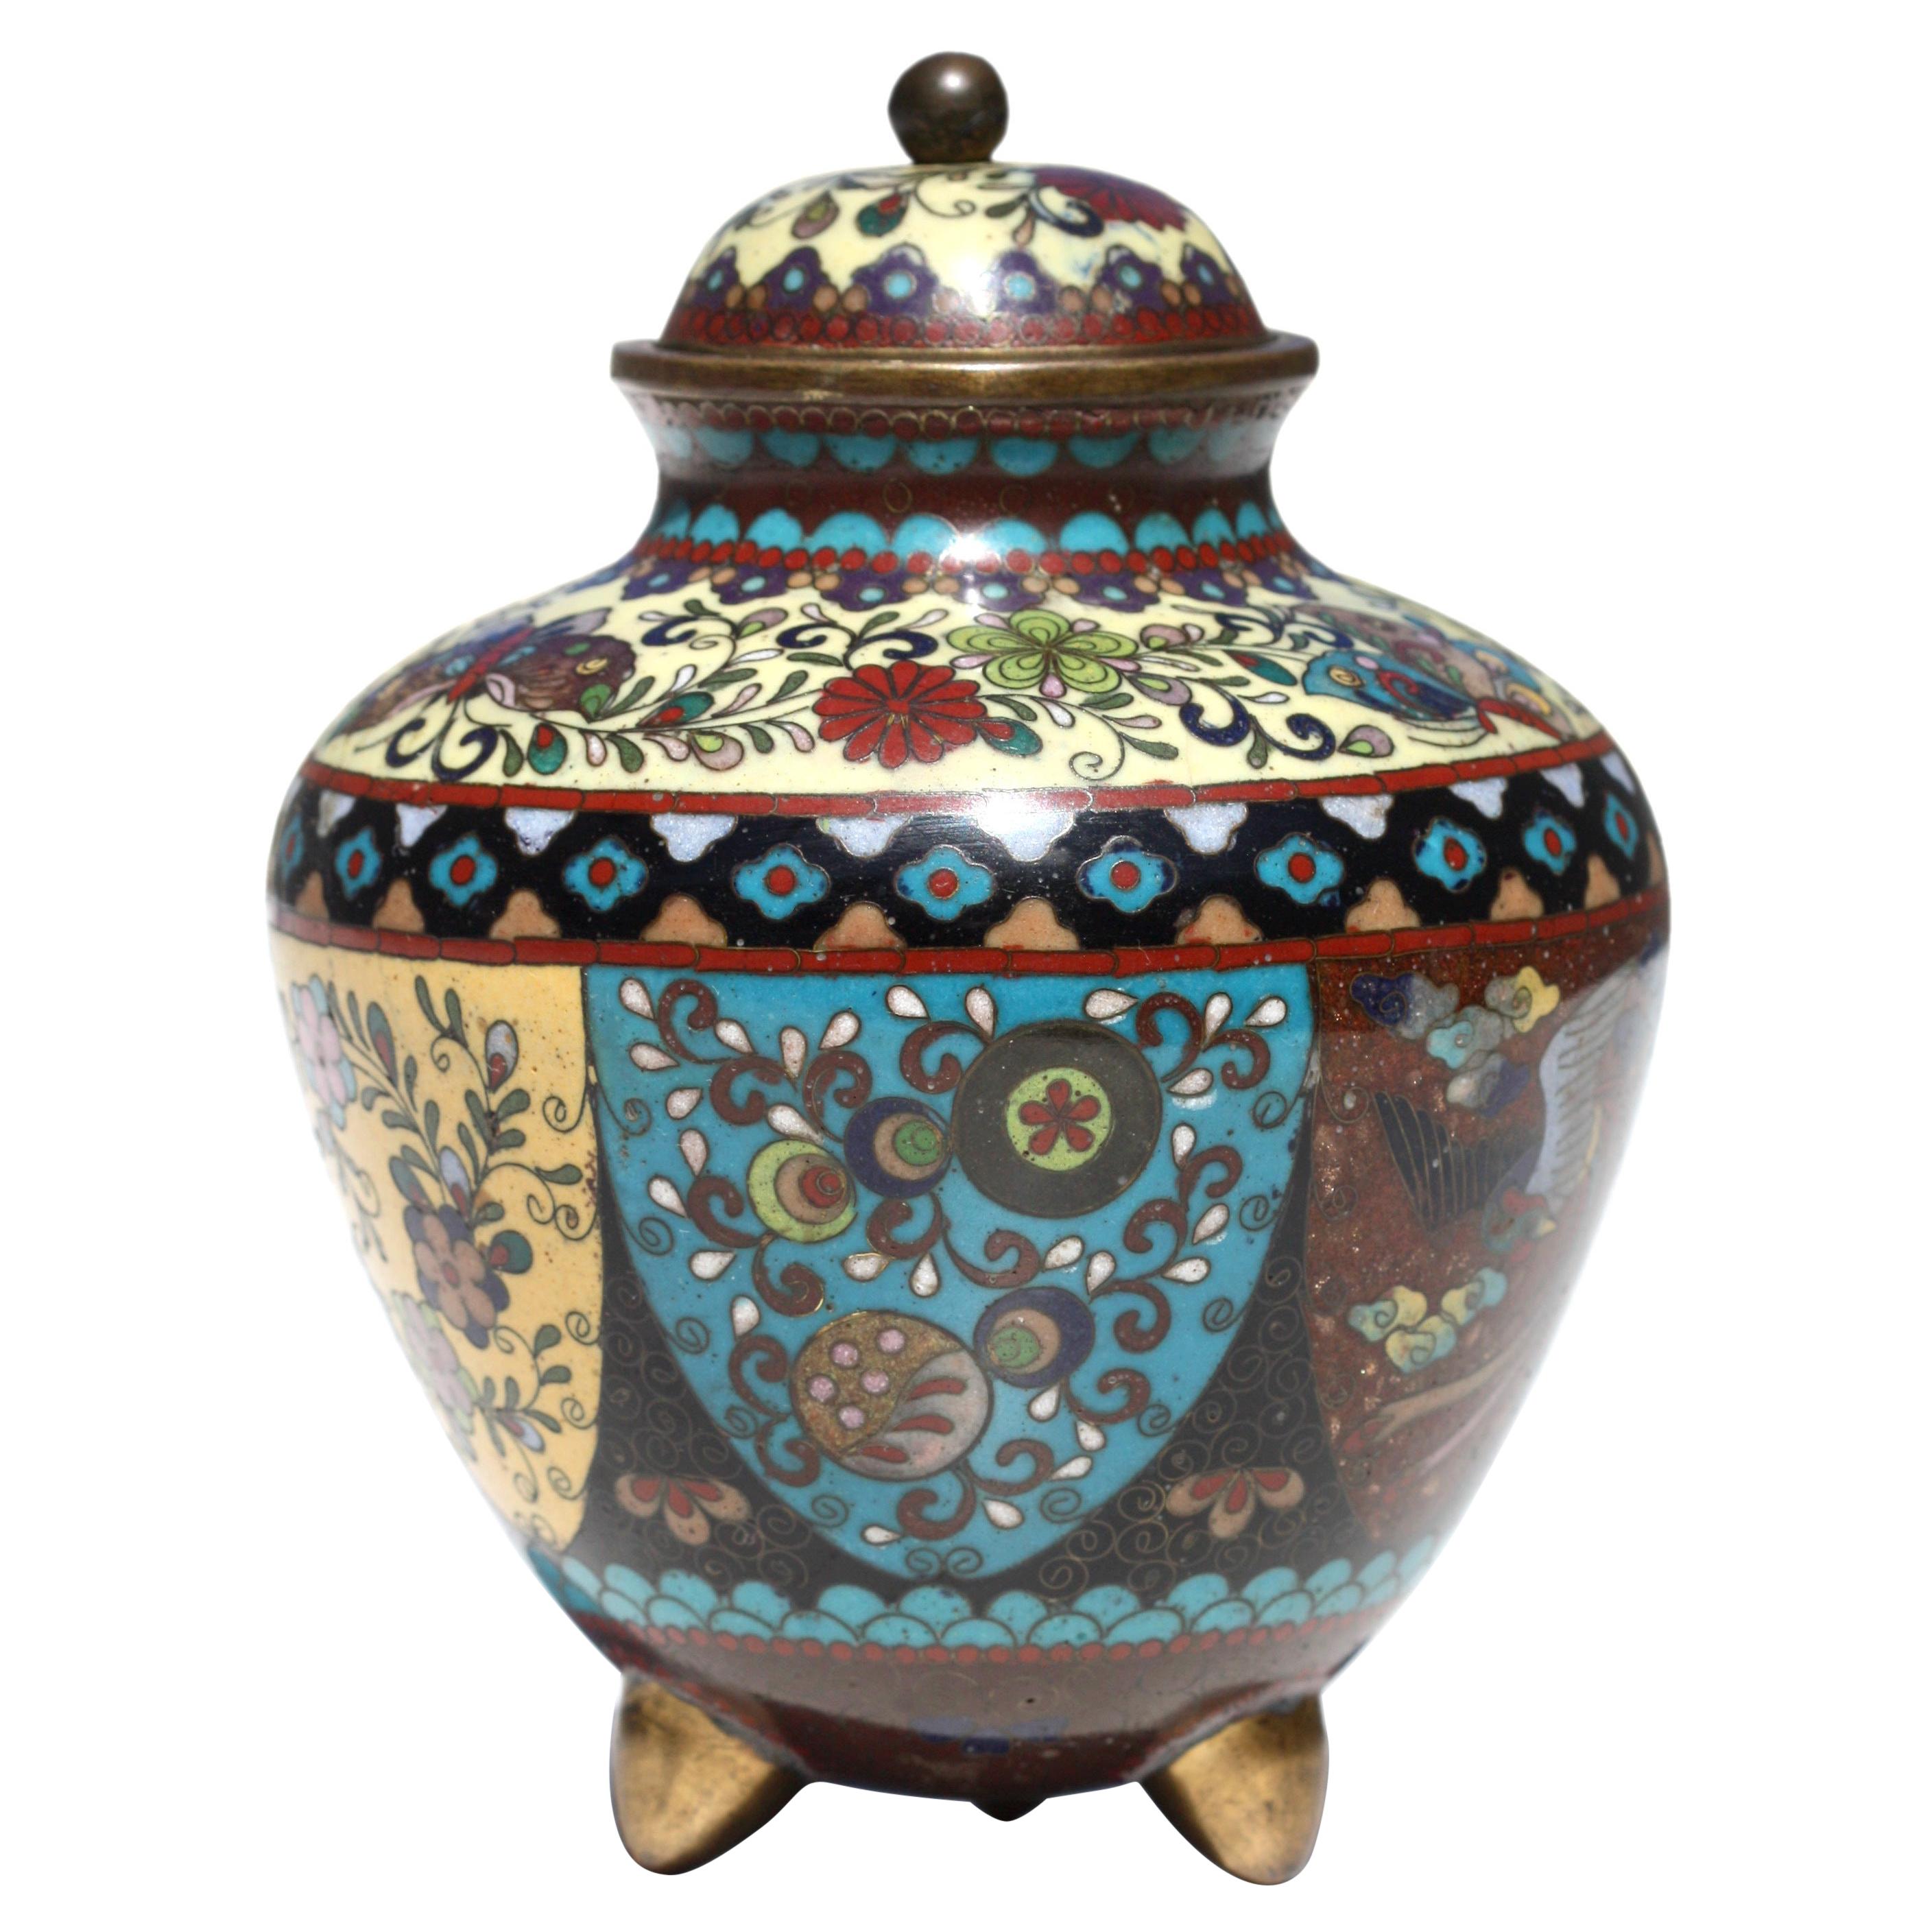 Japanese Cloisonne Vase and Cover, Meiji Period